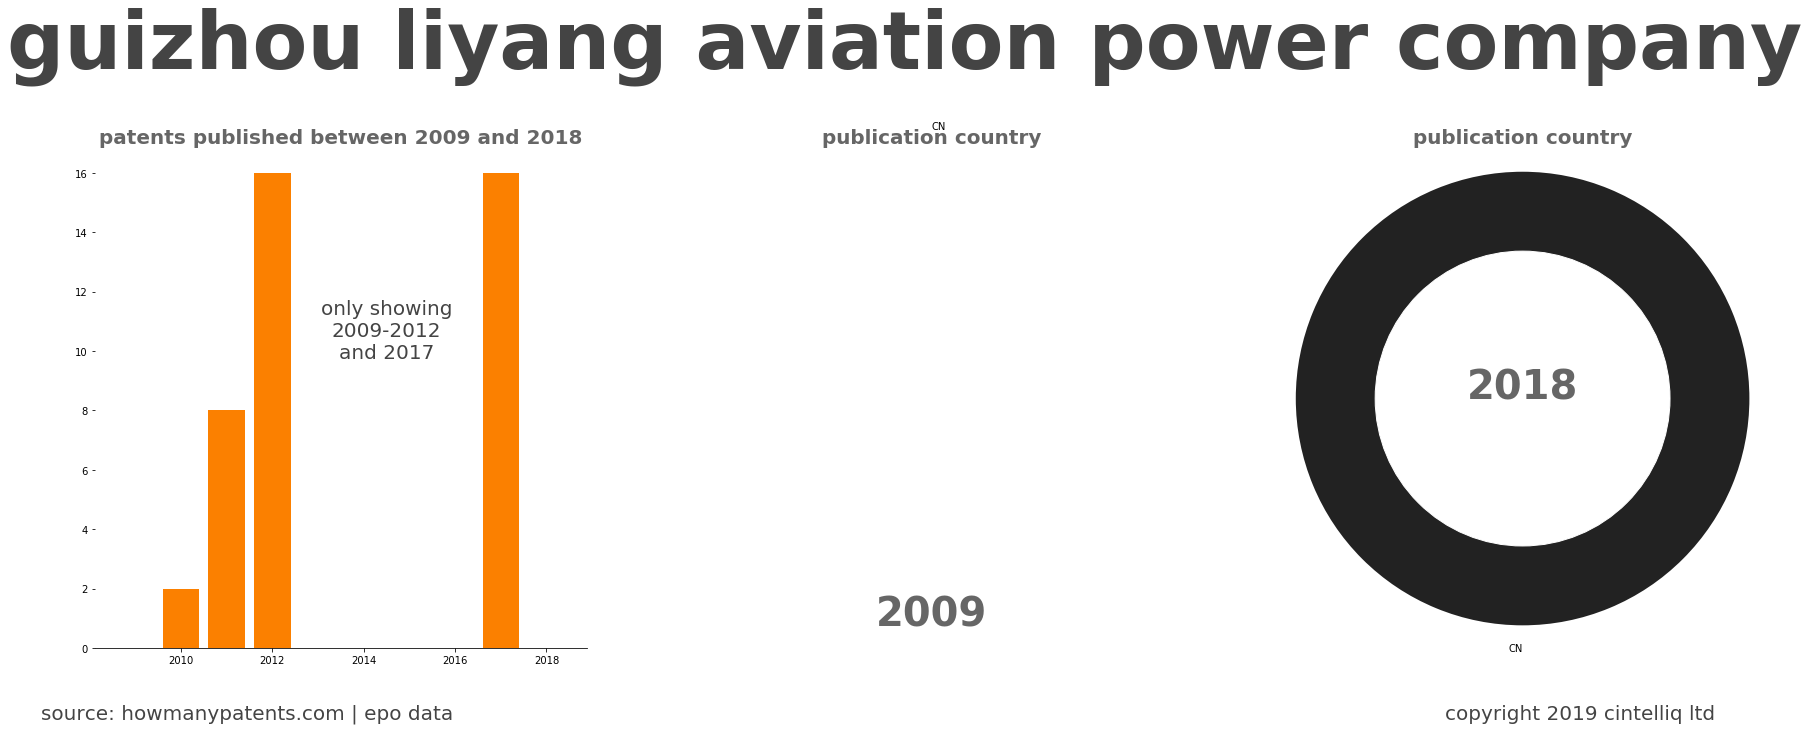 summary of patents for Guizhou Liyang Aviation Power Company